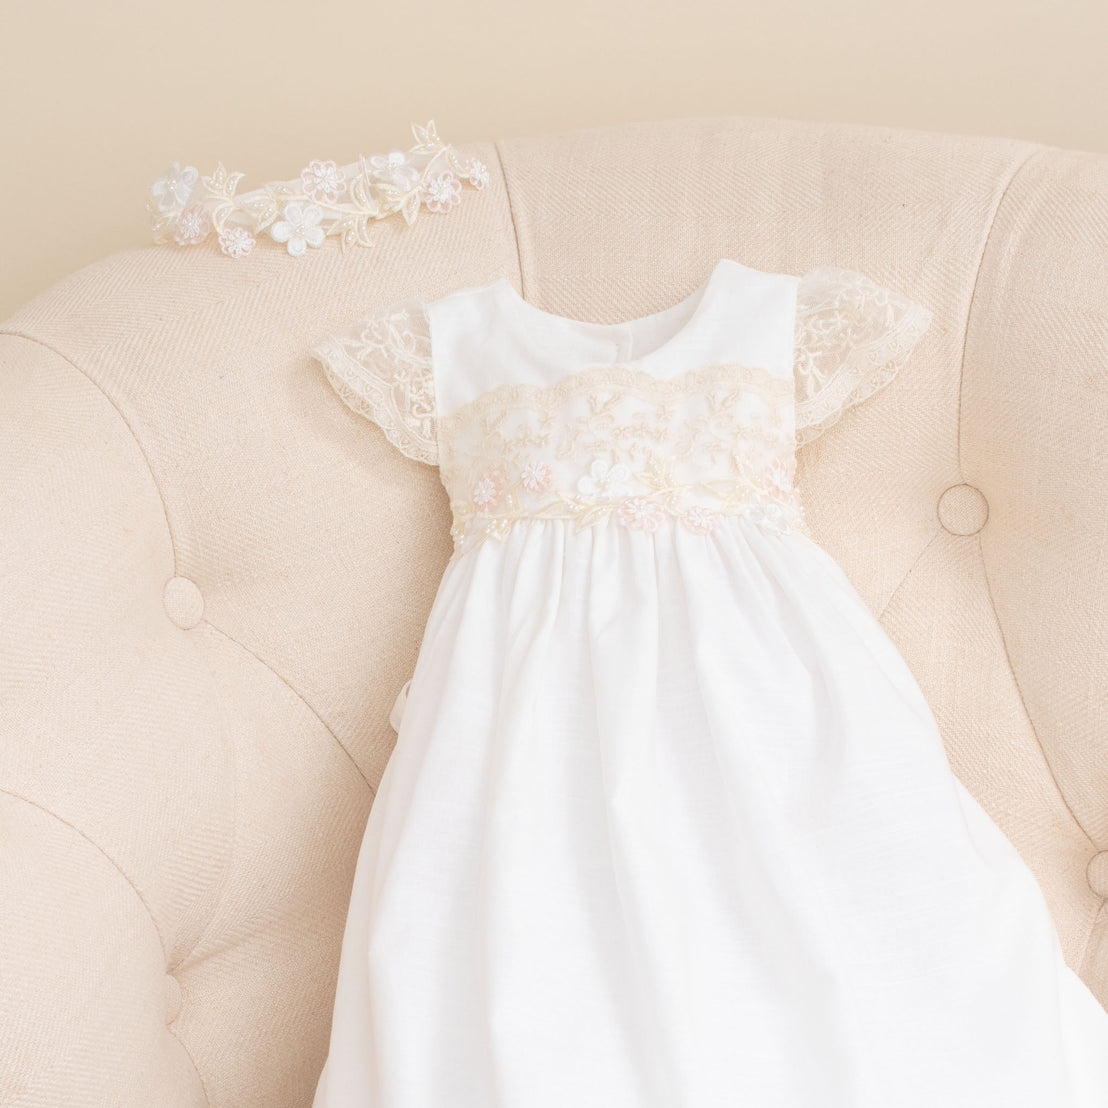 A Jessica Linen Gown with lace detailing displayed on a soft beige vintage sofa, complemented by the Jessica Beaded Flower Headband, a floral detailed lace headband, placed above it.